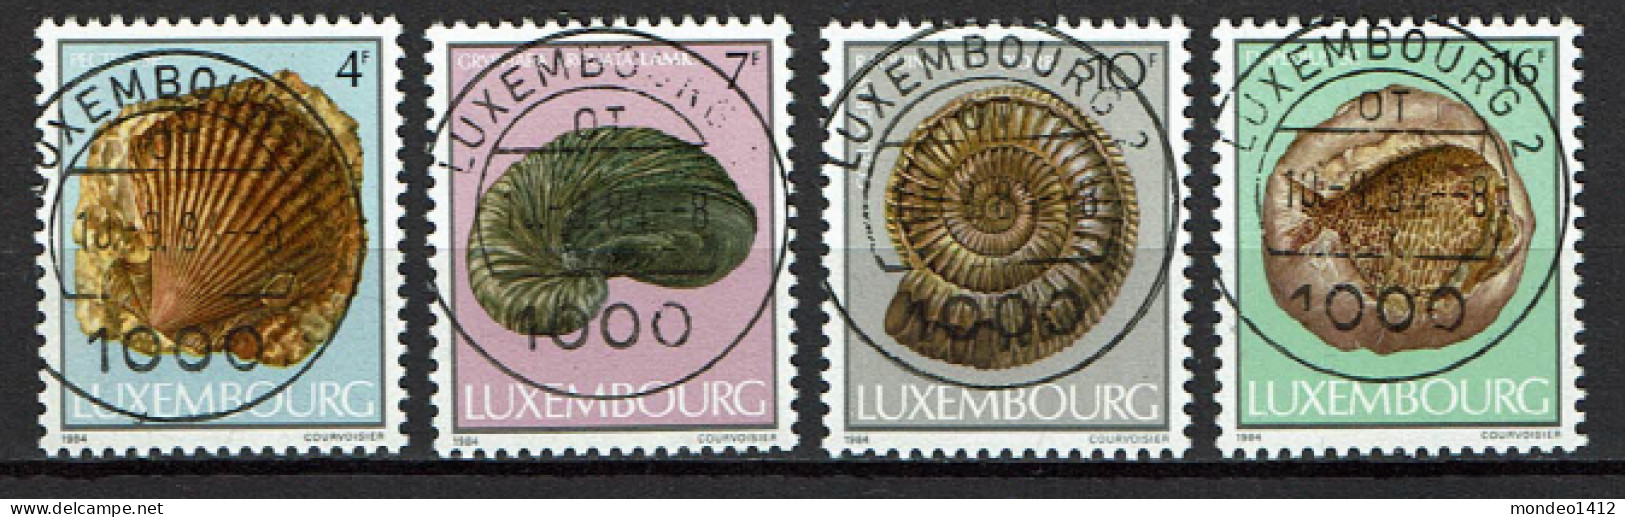 Luxembourg 1984 - YT 1057/1060 - Fossils, Fossielen, Fossiles - Usati